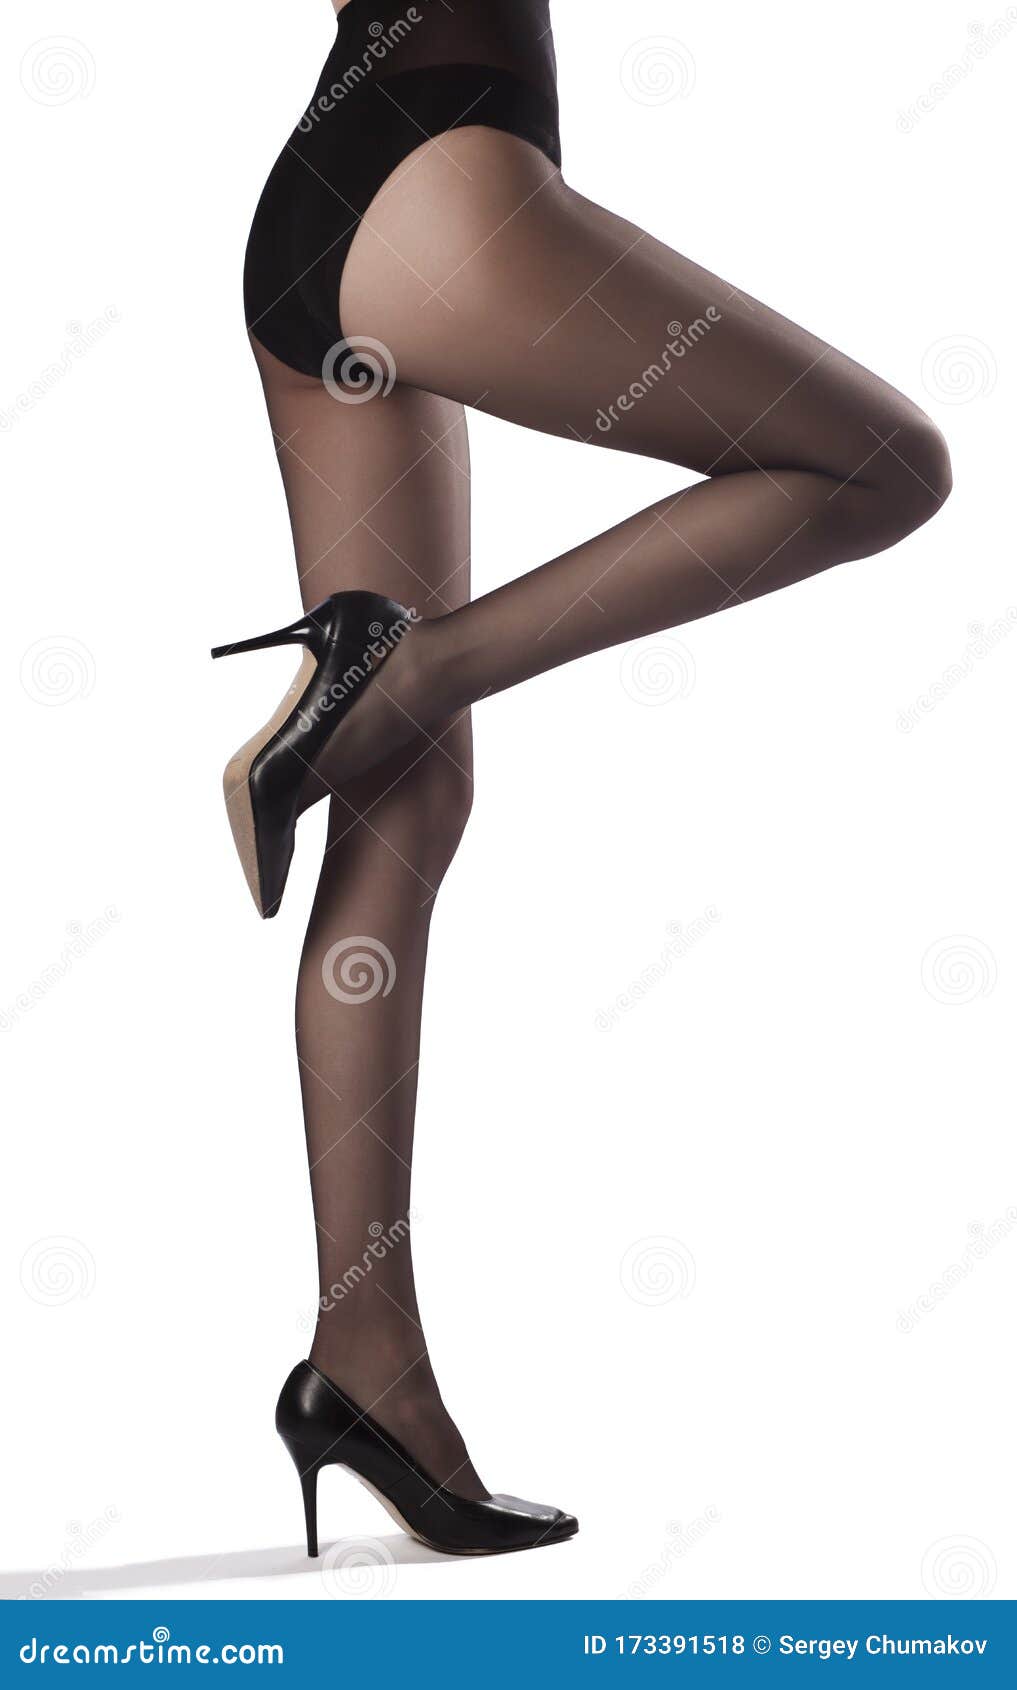 Black Tights. Female Legs with Pantyhose Stock Image - Image of glamour,  feet: 115988599